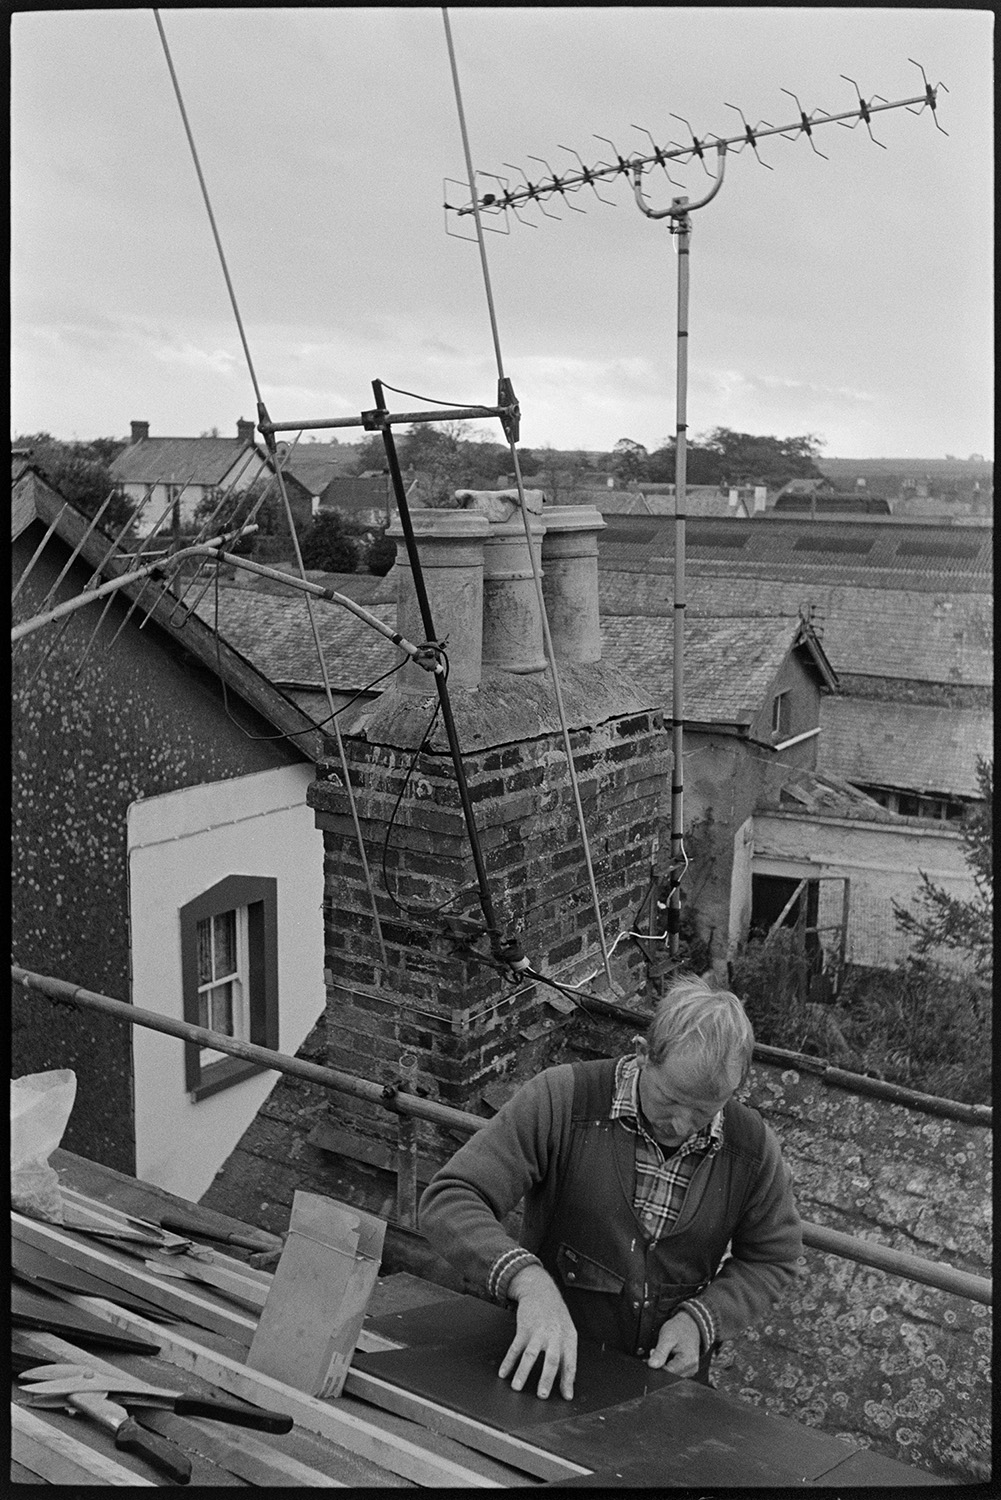 Man hanging slates with view over village with church tower. 
[Mike Hiscock hanging slates on a roof in Chulmleigh. Other rooftops and television aerials can be seen behind him.]